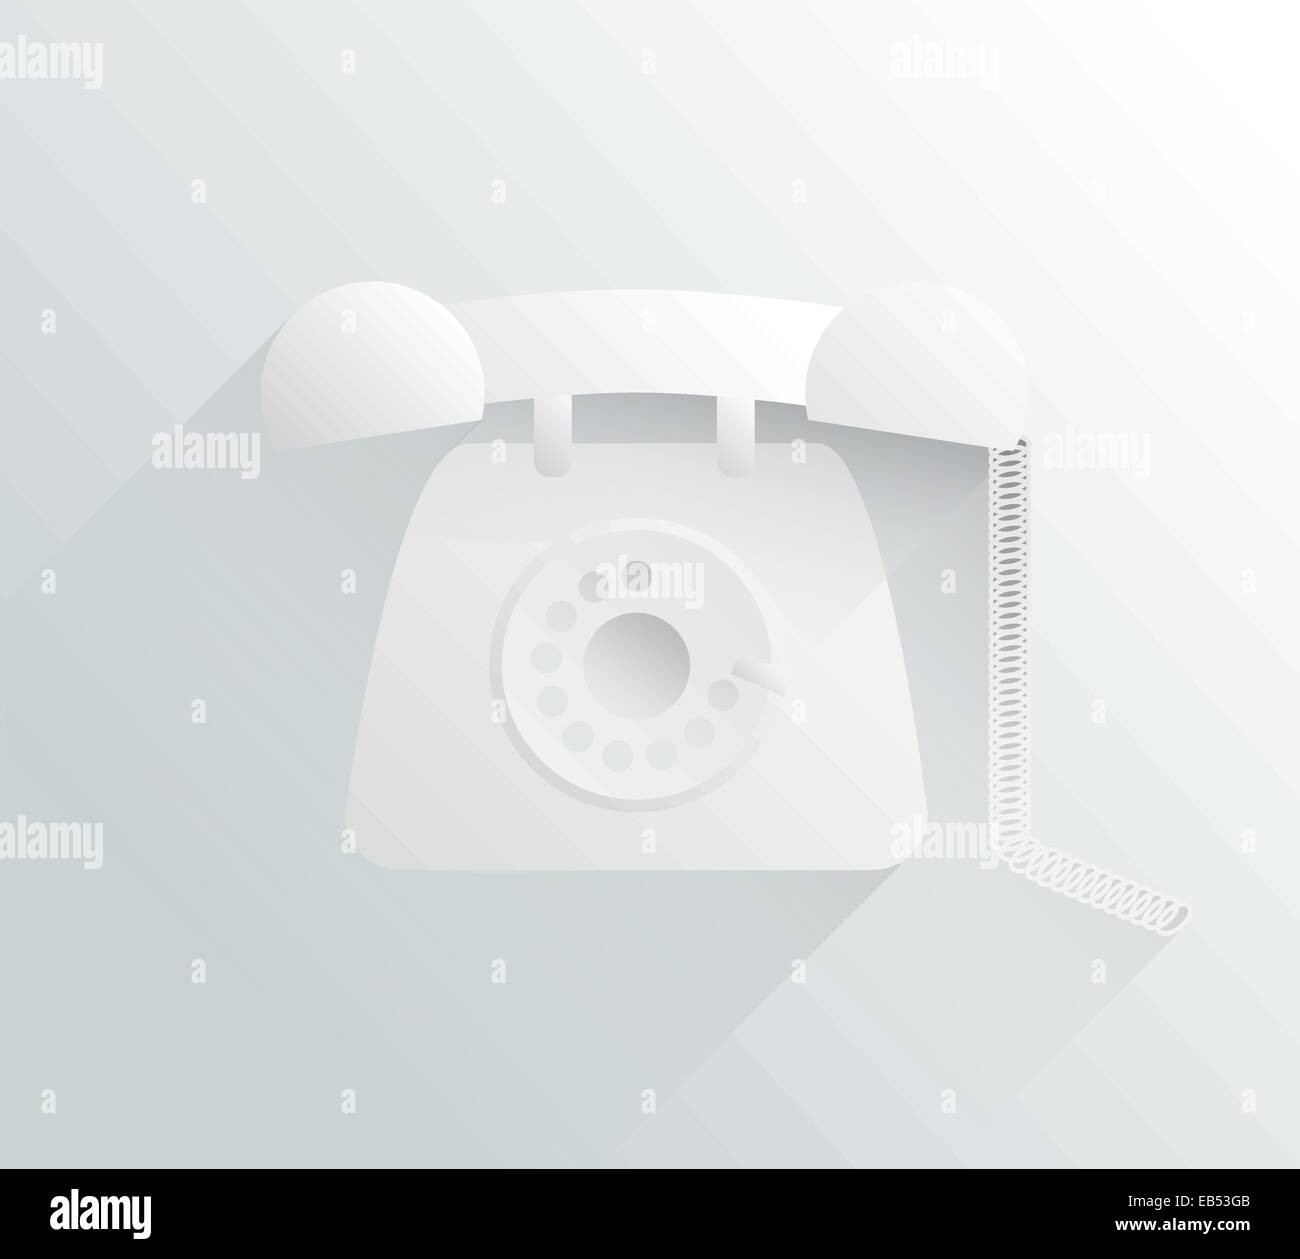 White and grey dial phone in simple design Stock Vector